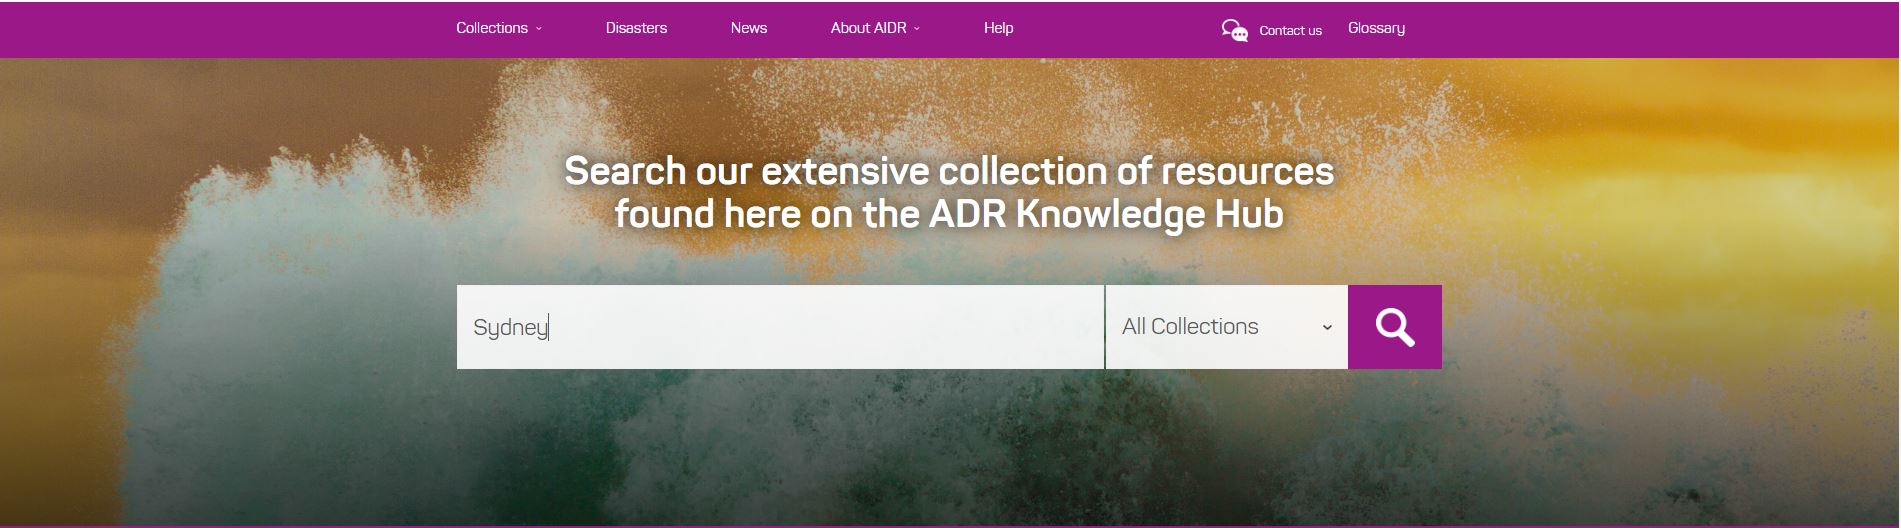 Image of the search bar from the Knowledge Hub